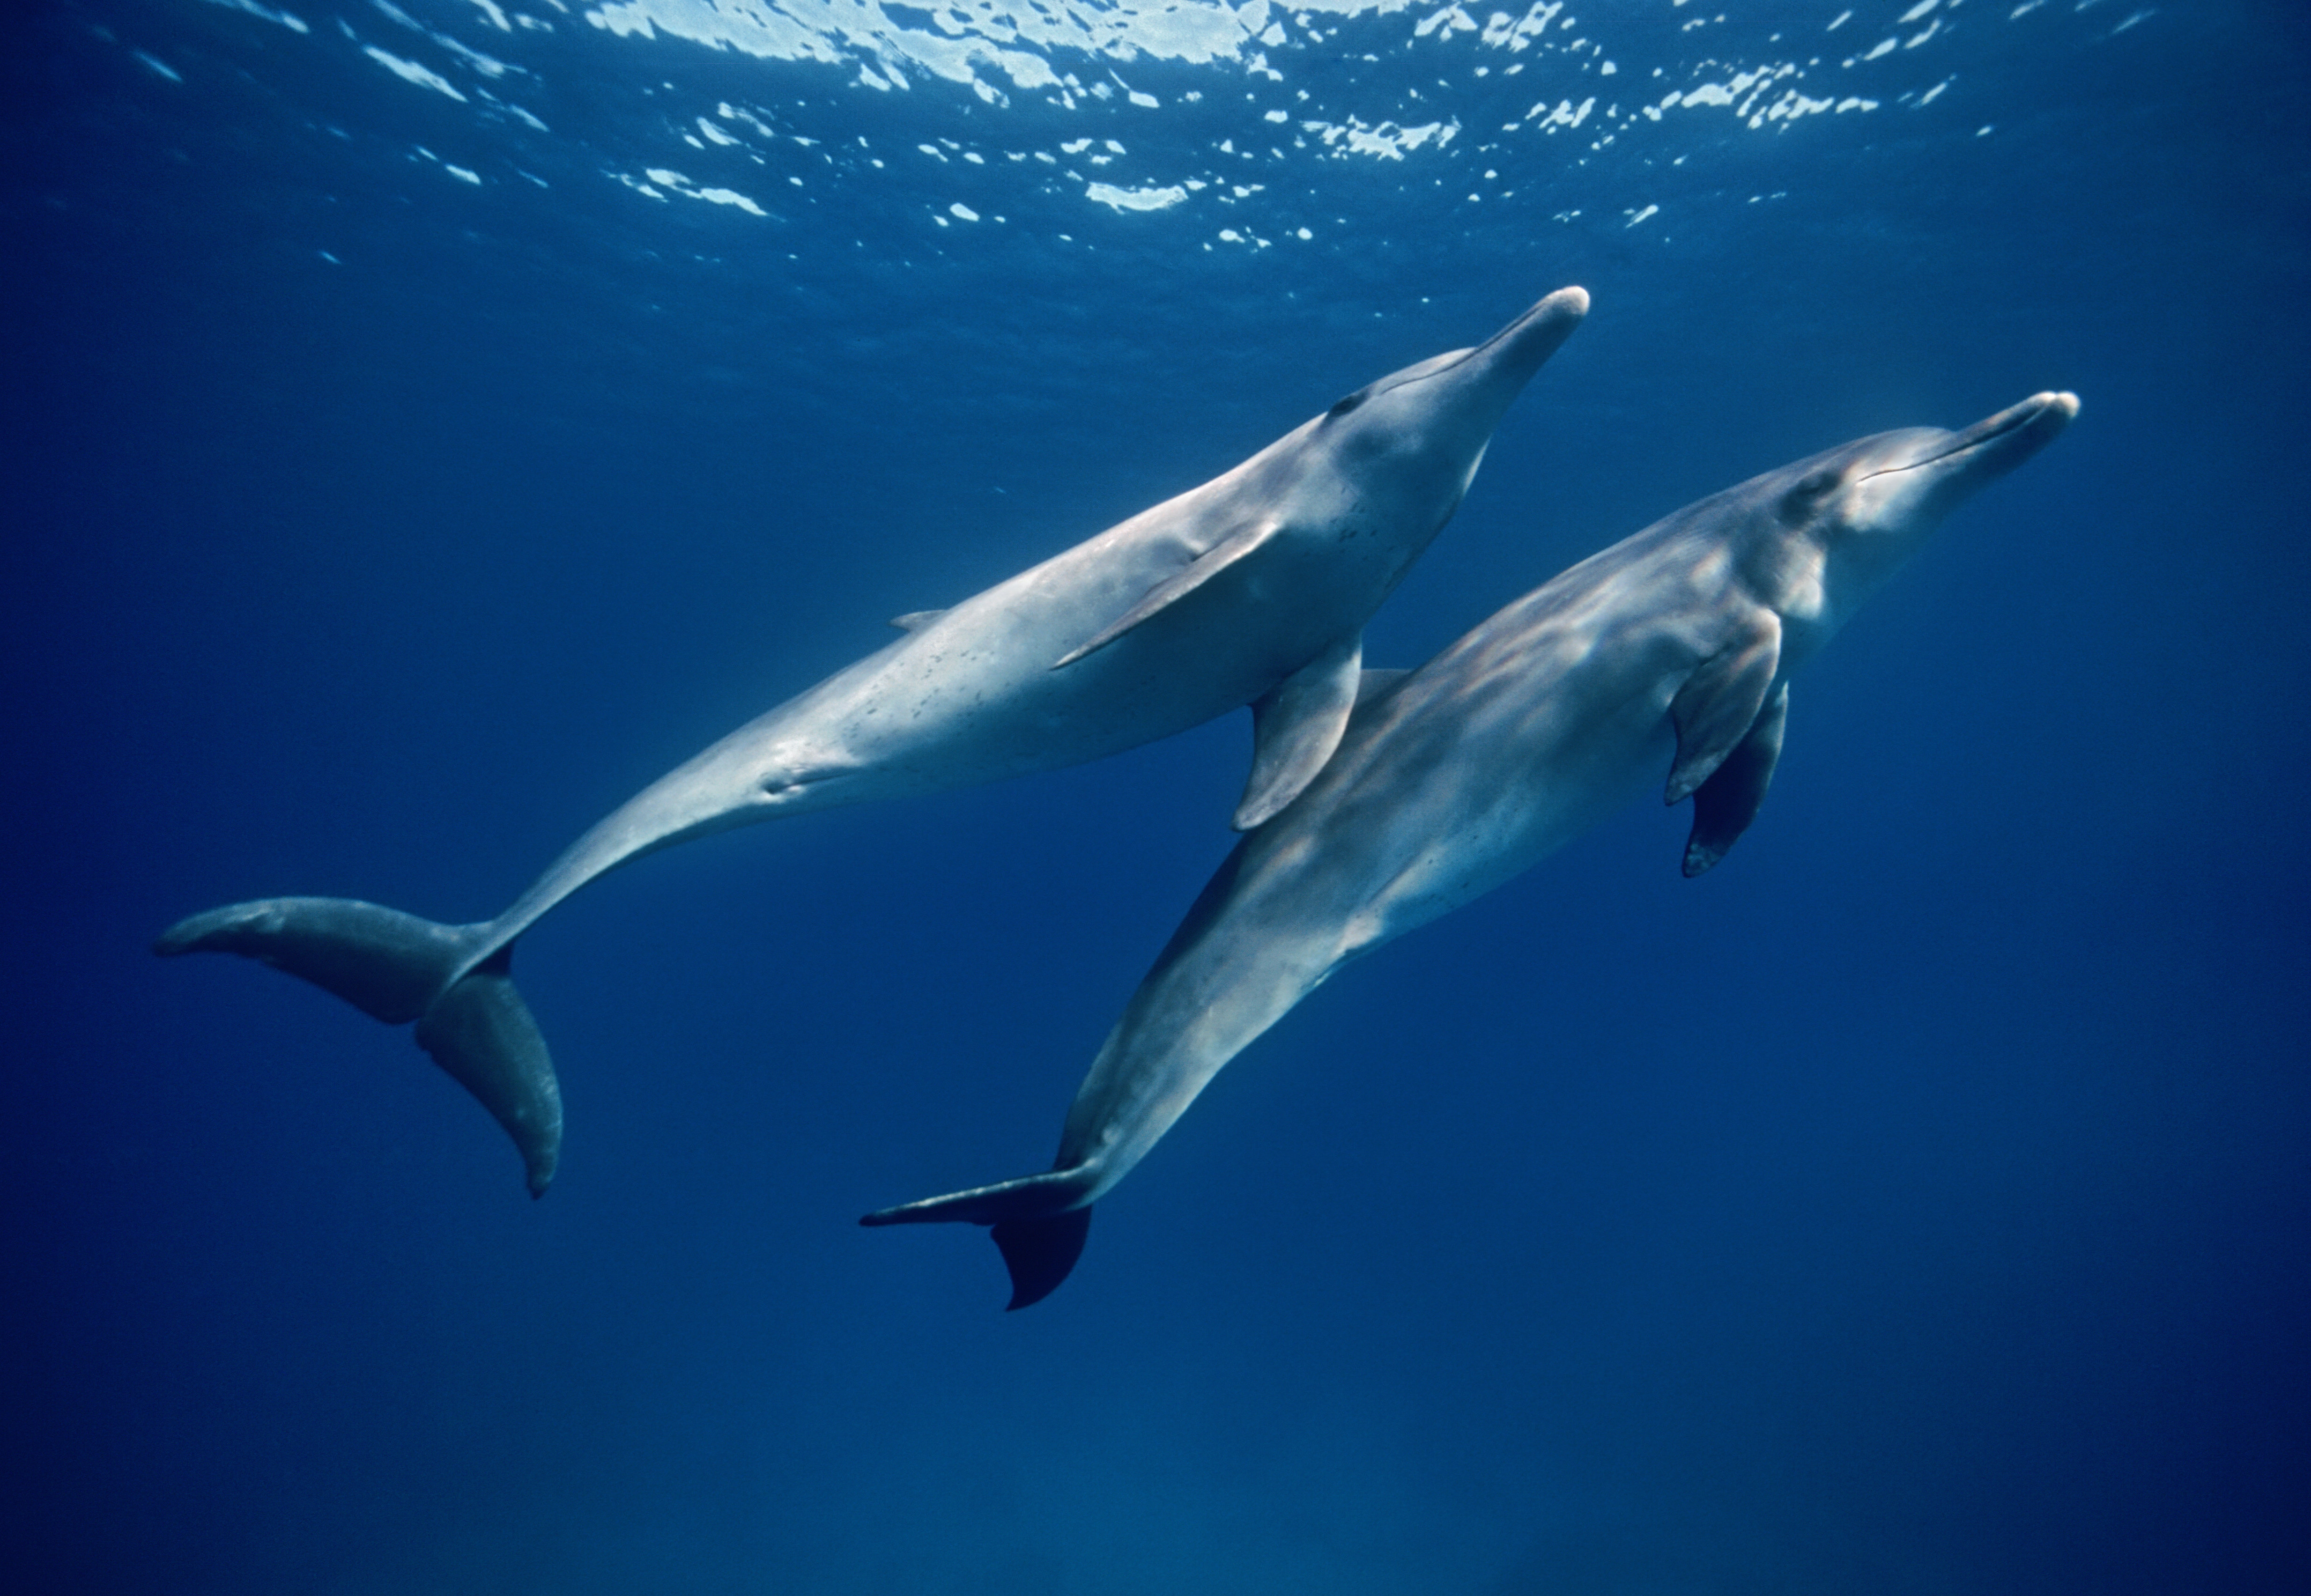 Two dolphins swimming in the waters off the coast of Italy where fishermen set up nets to capture, kill them, and sell their meat to local restaurants